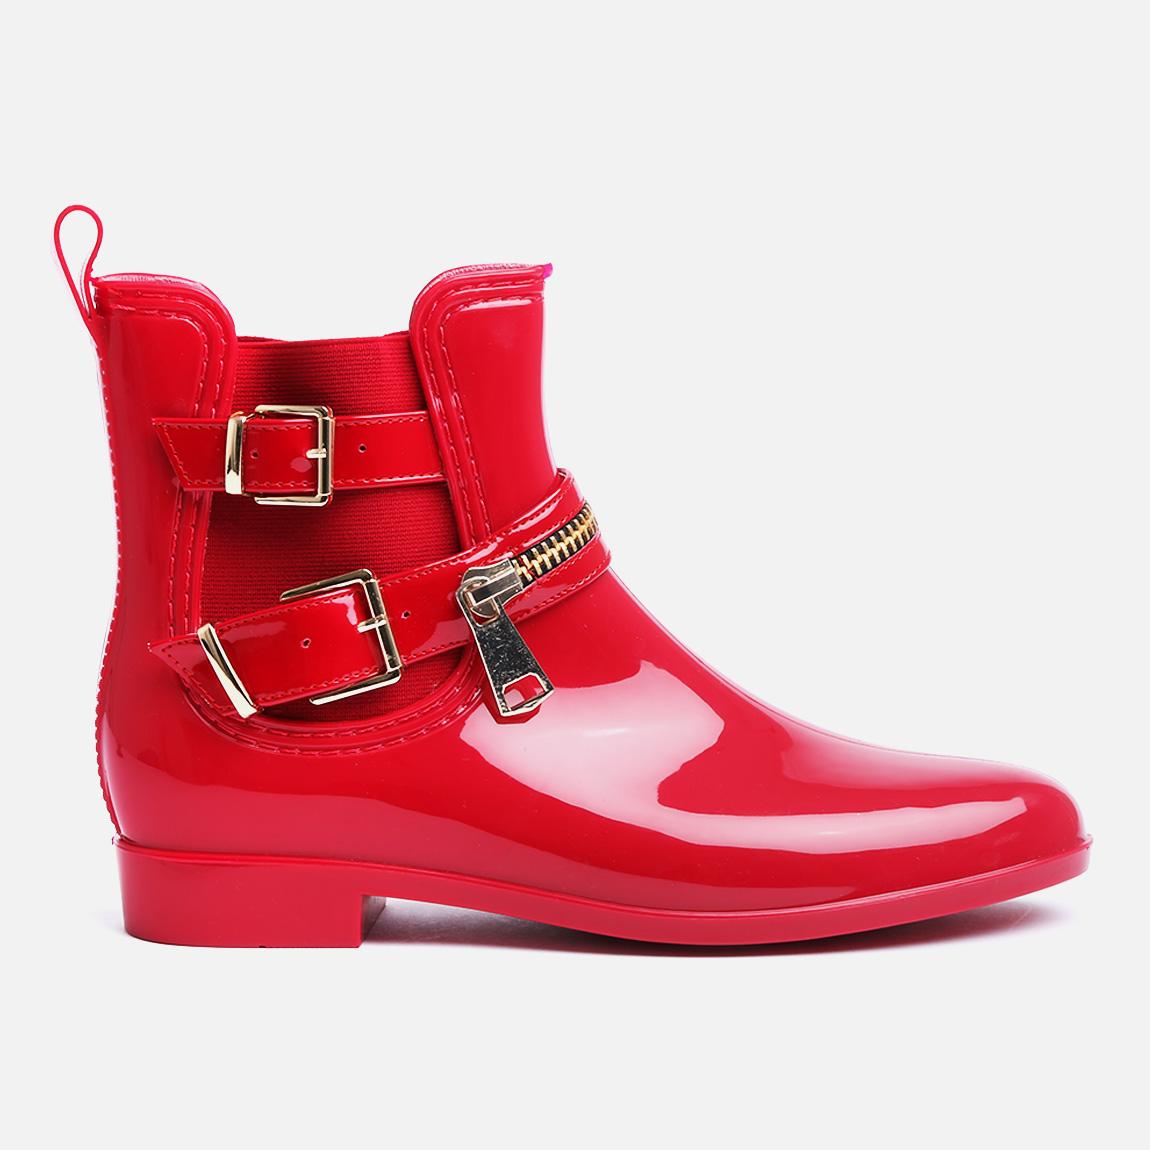 Tanit – red Footwork Boots | Superbalist.com